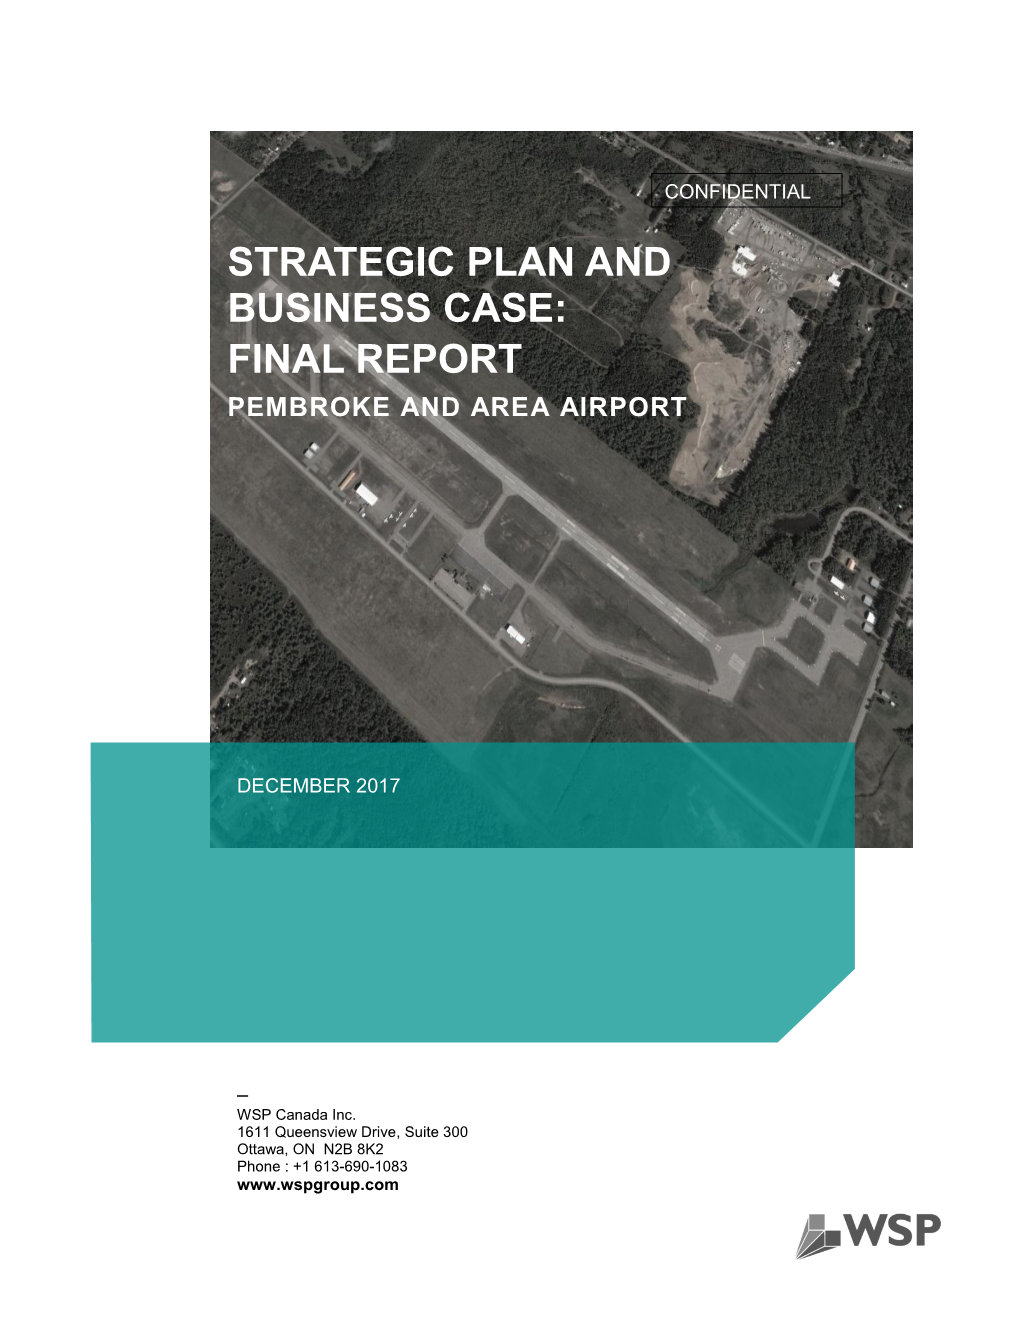 Strategic Plan and Business Case: Final Report Pembroke and Area Airport